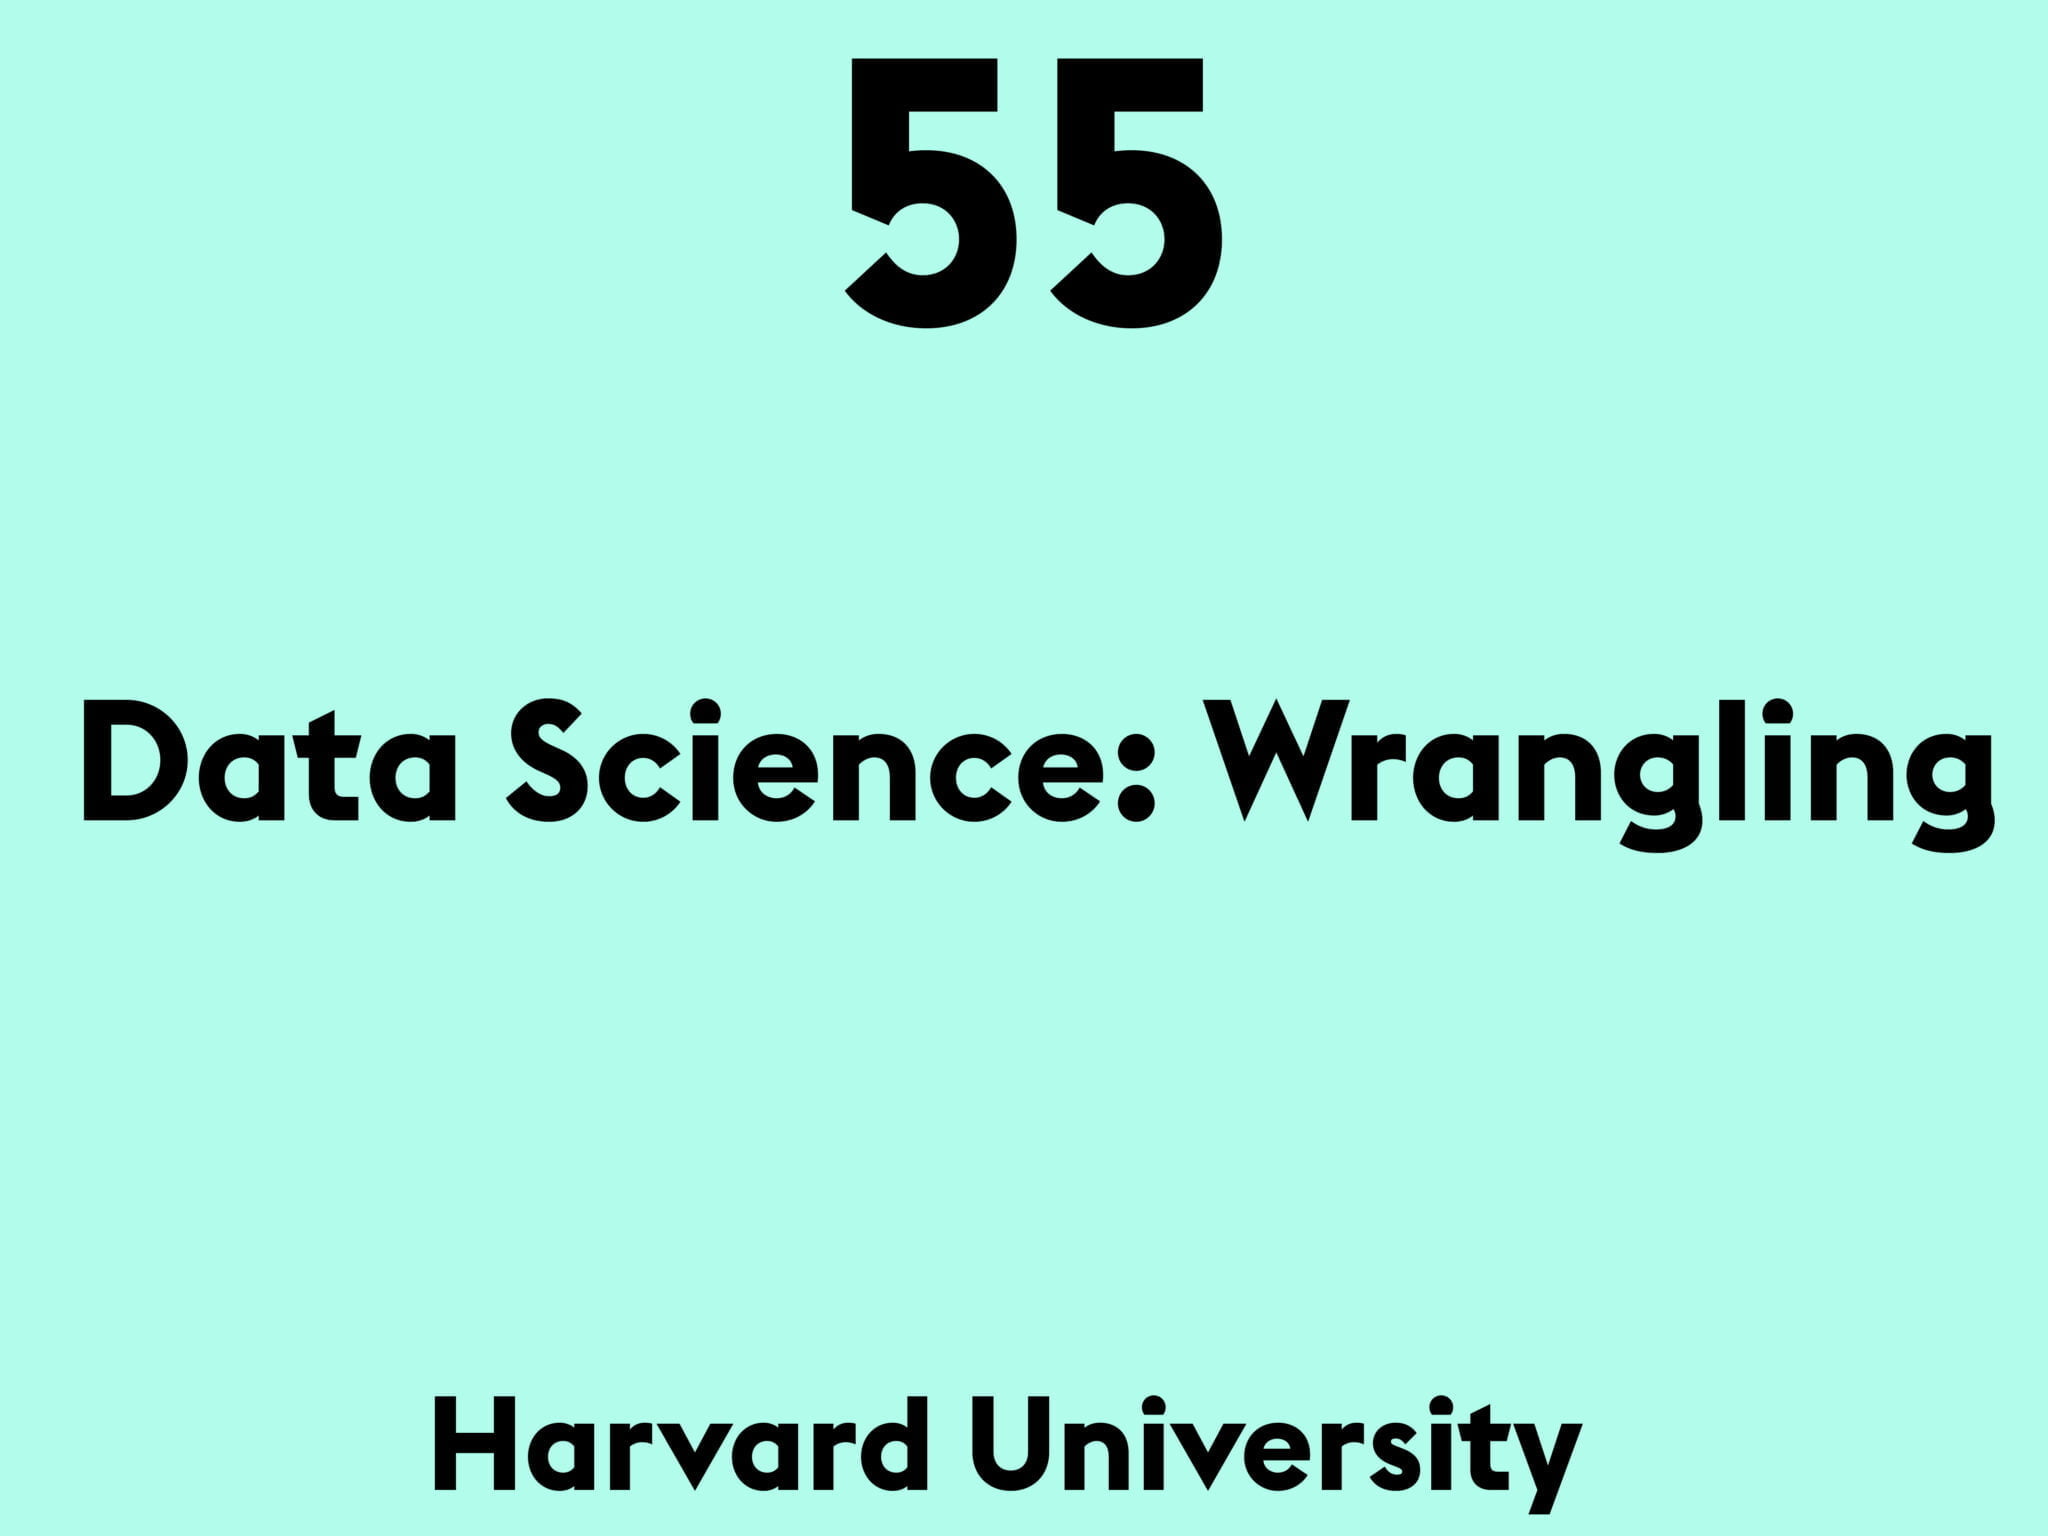 Data Science: Wrangling